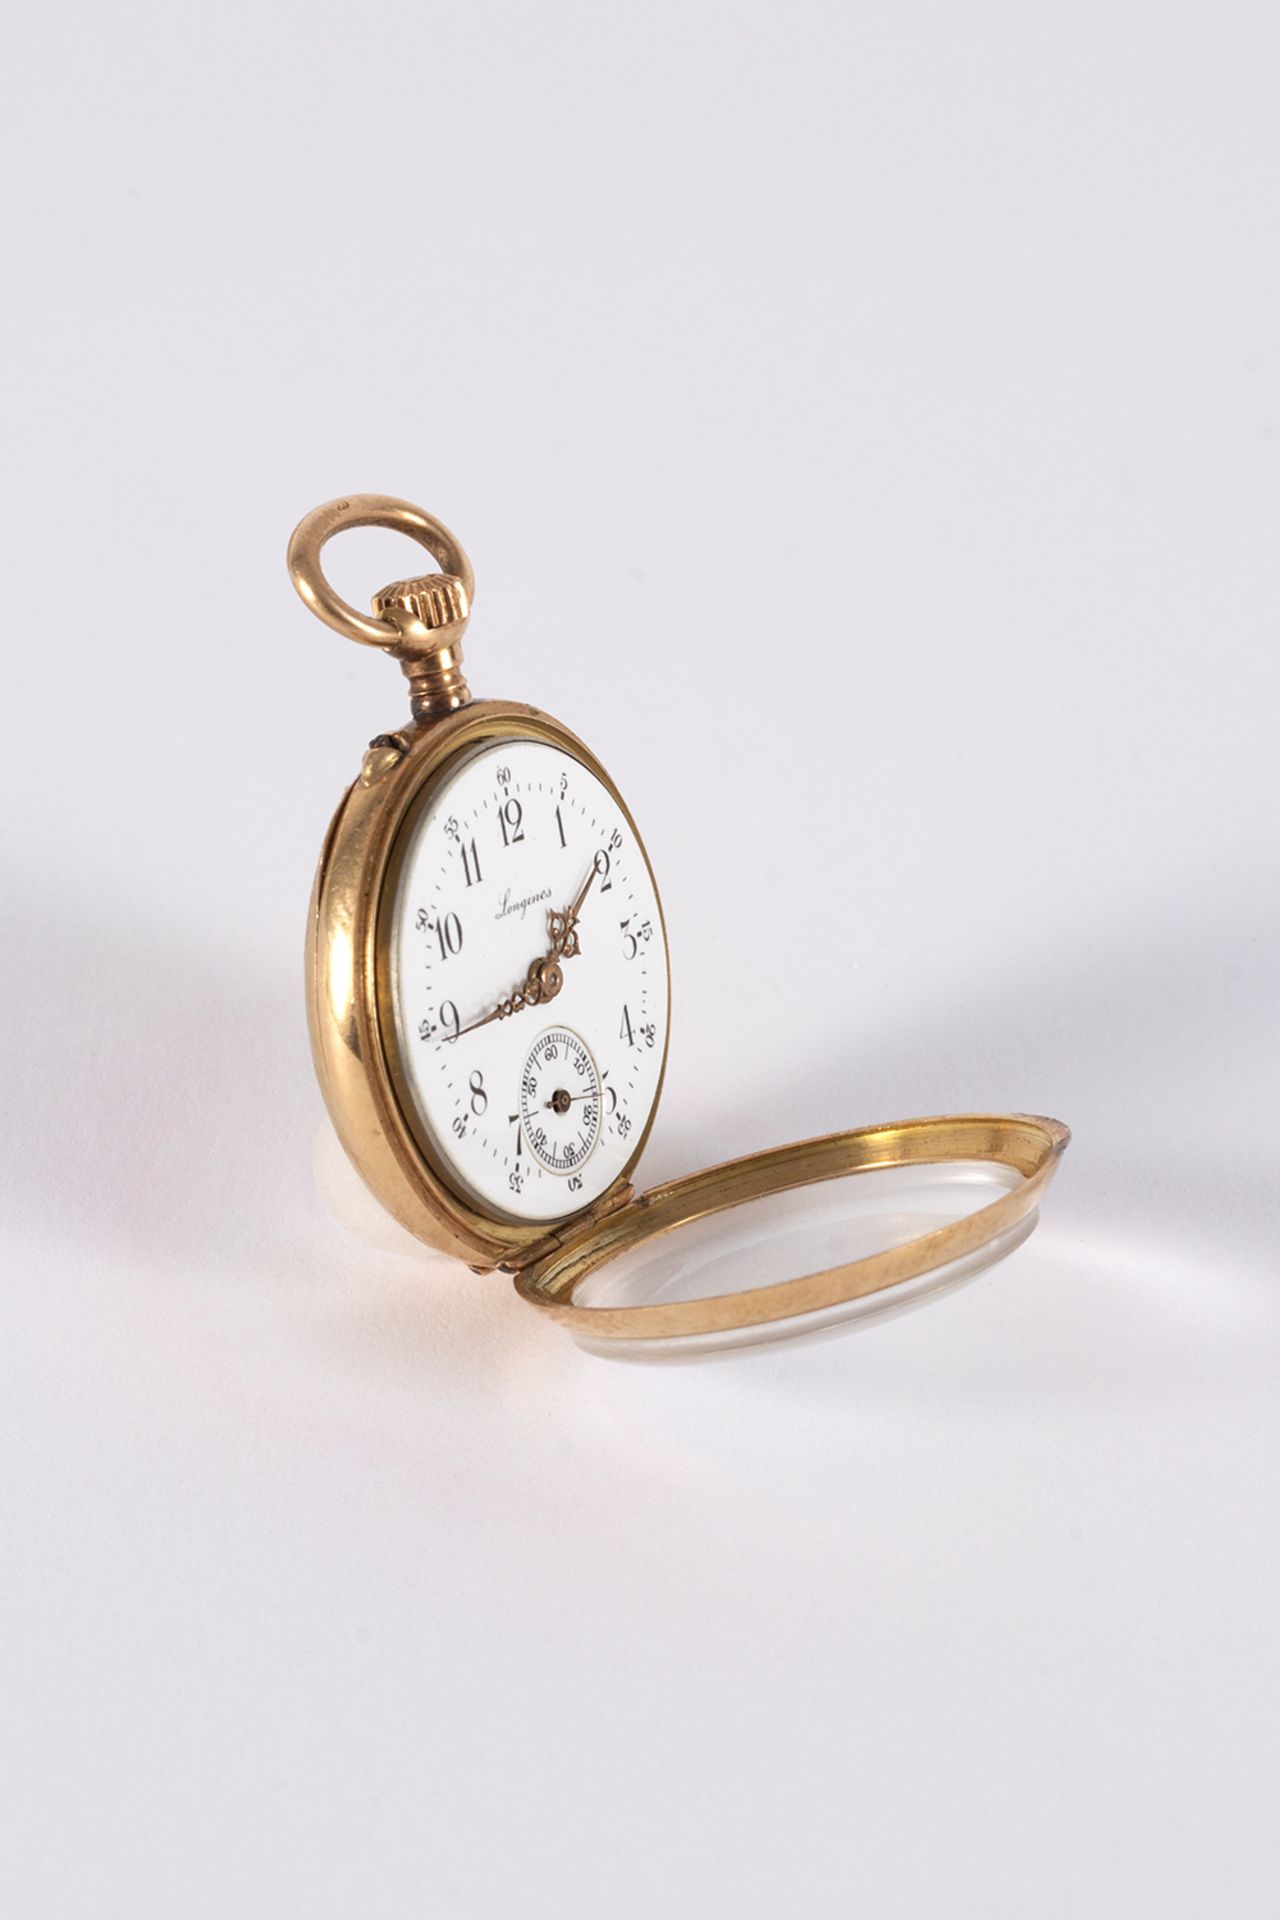 Longines hanging clock in gold, enamelled crown decoration on the reverse - remontaire mechanism. - Image 3 of 4